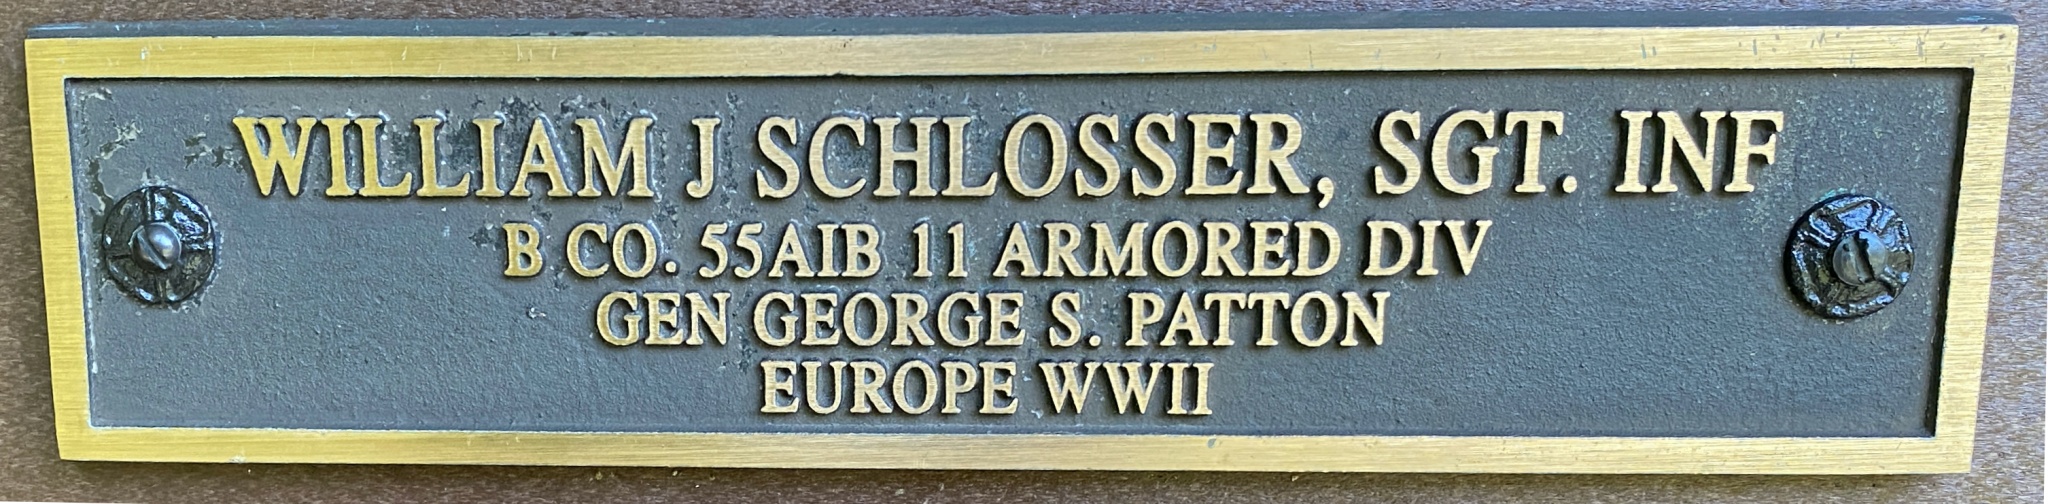 WILLIAM J SCHLOSSER, SGT.INF B CO. 55AIB 11 ARMORED DIV GEN GEORGE S. PATTON EUROPE WWII